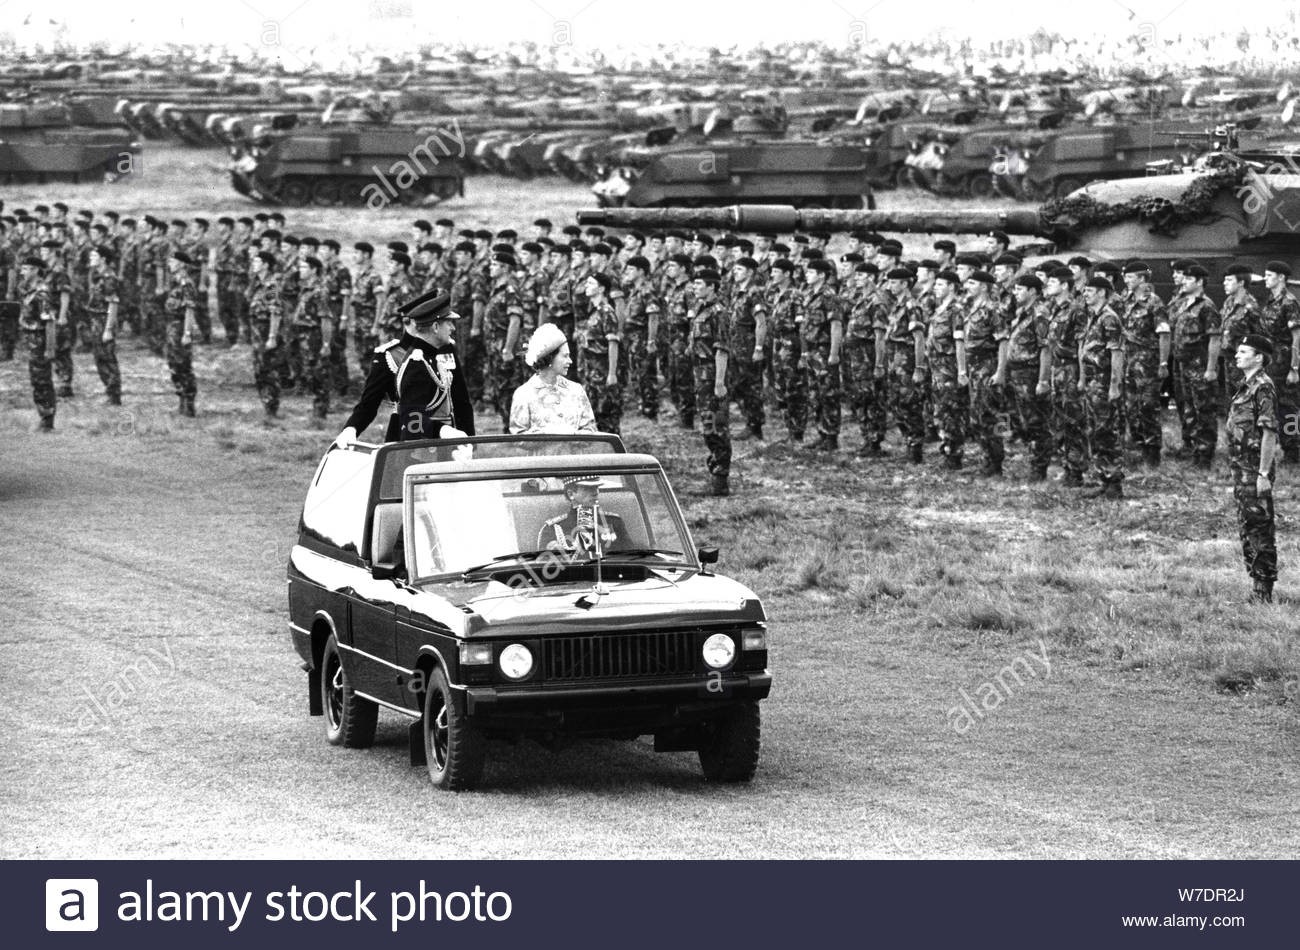 The Queen and Prince Philip inspecting the army at Sennelager, West Germany, in 1977. 